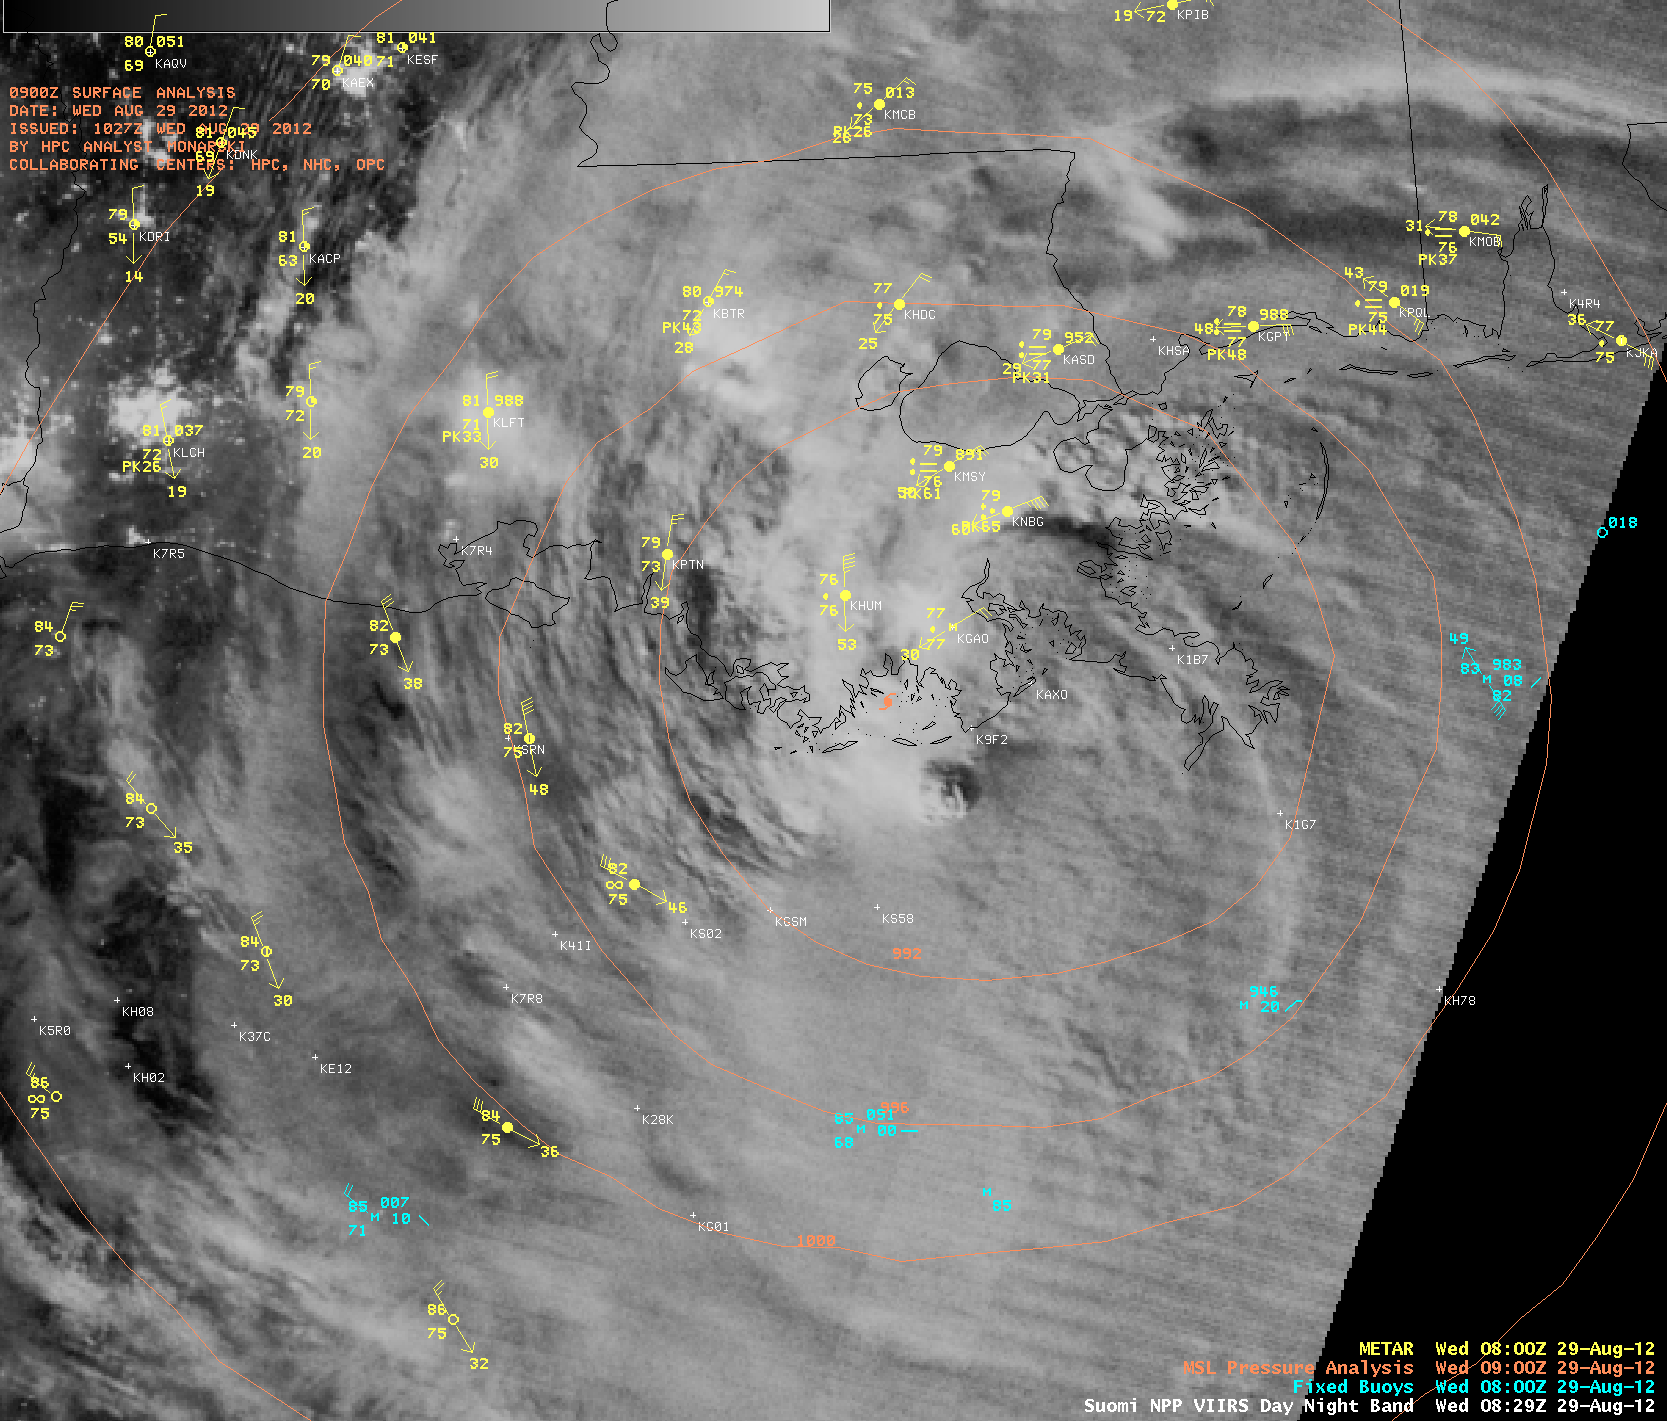 Suomi NPP VIIRS 0.8 Âµm Day/Night Band and 11.45 Âµm IR channel images